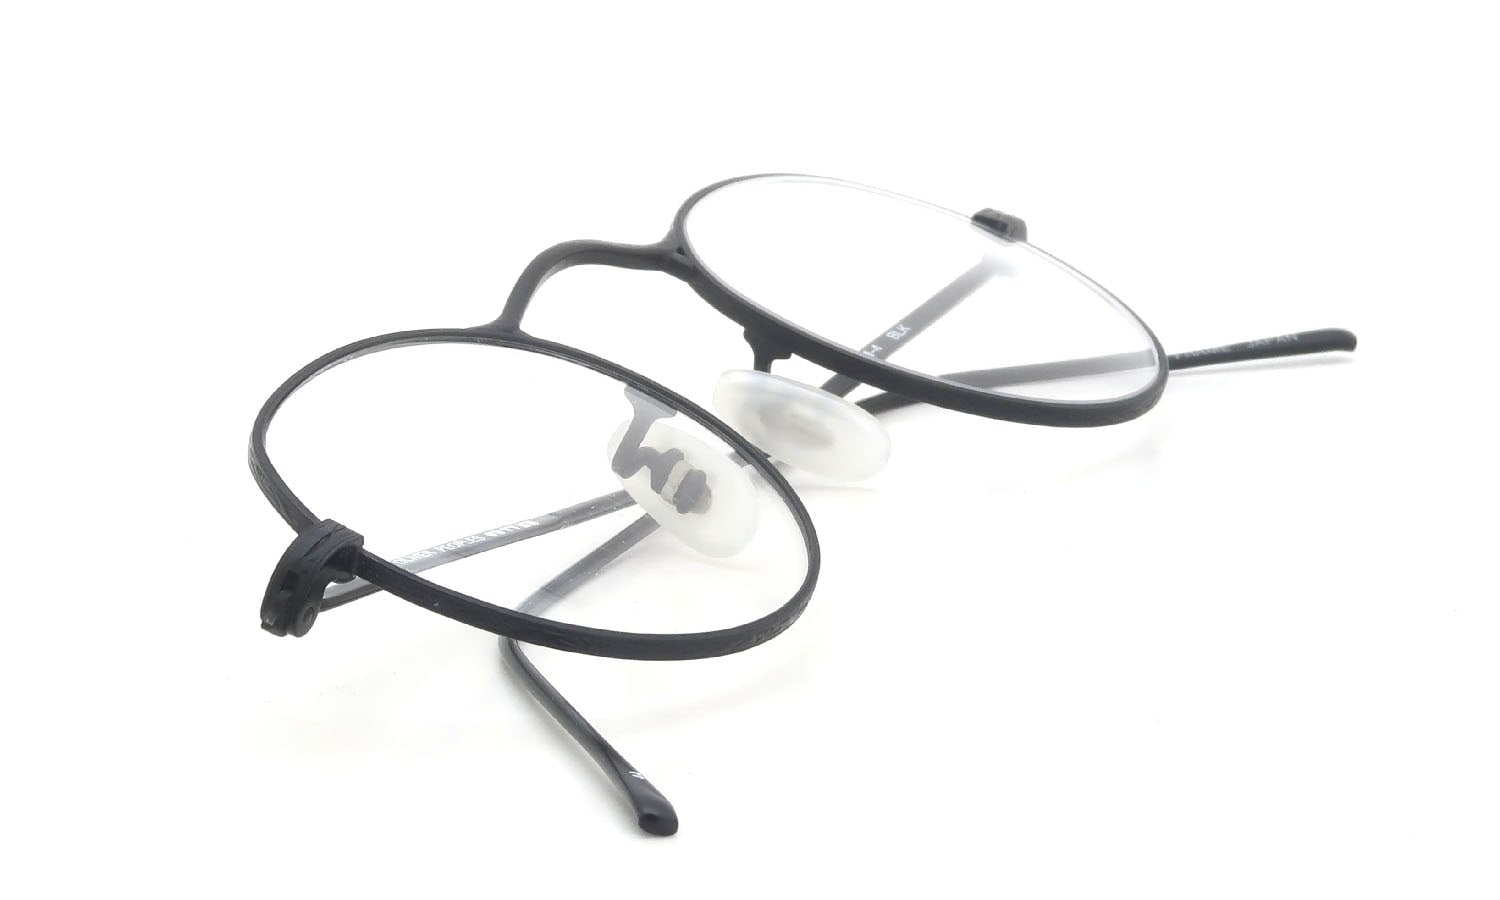 OLIVER PEOPLES archive 初期：M4 BLK